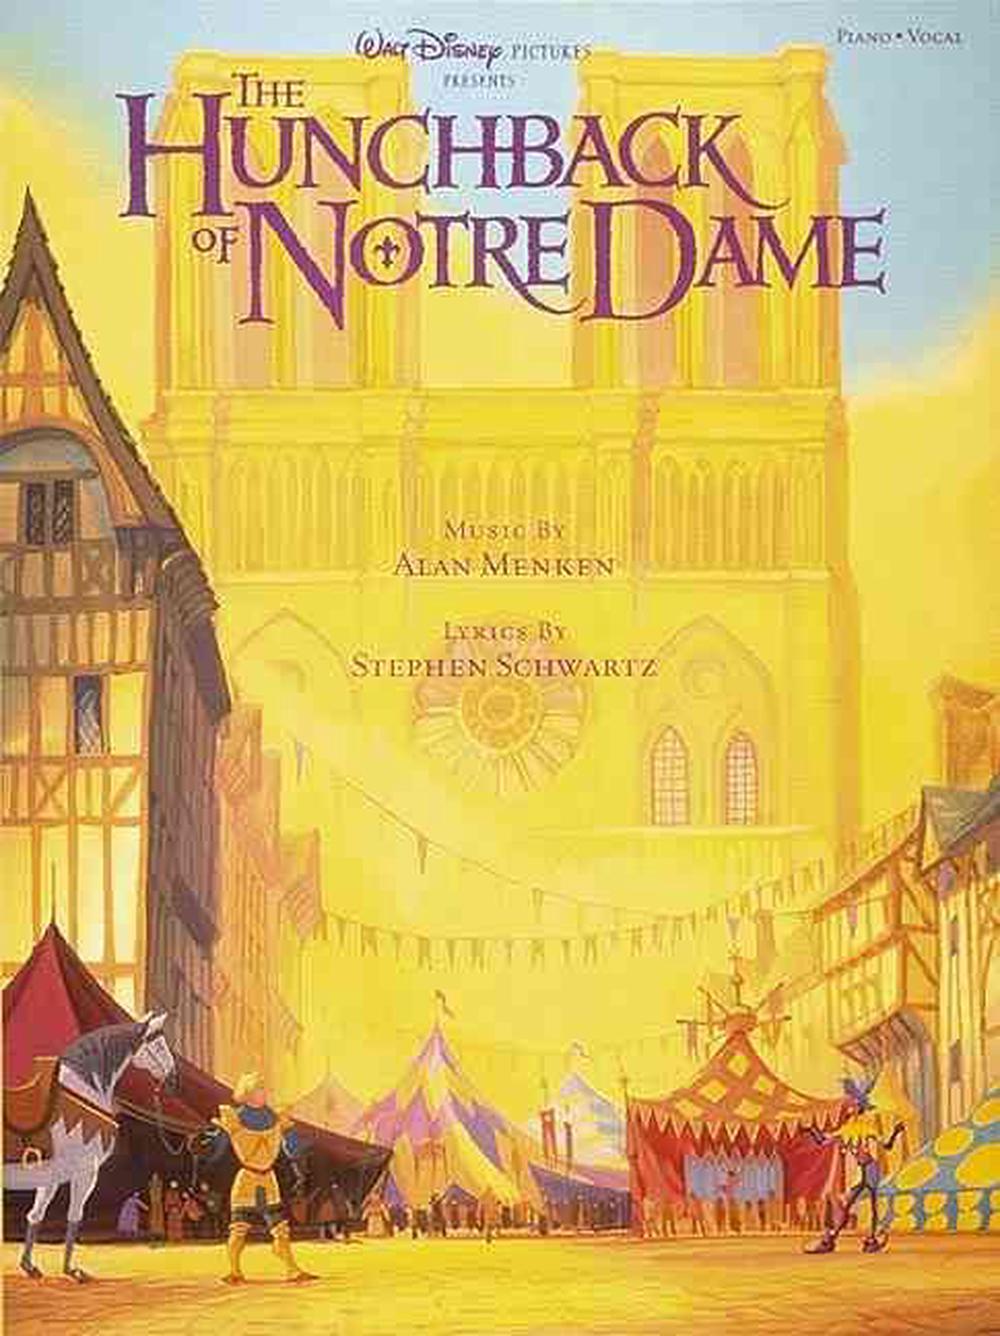 The Hunchback of Notre Dame by Walt Disney Productions (English